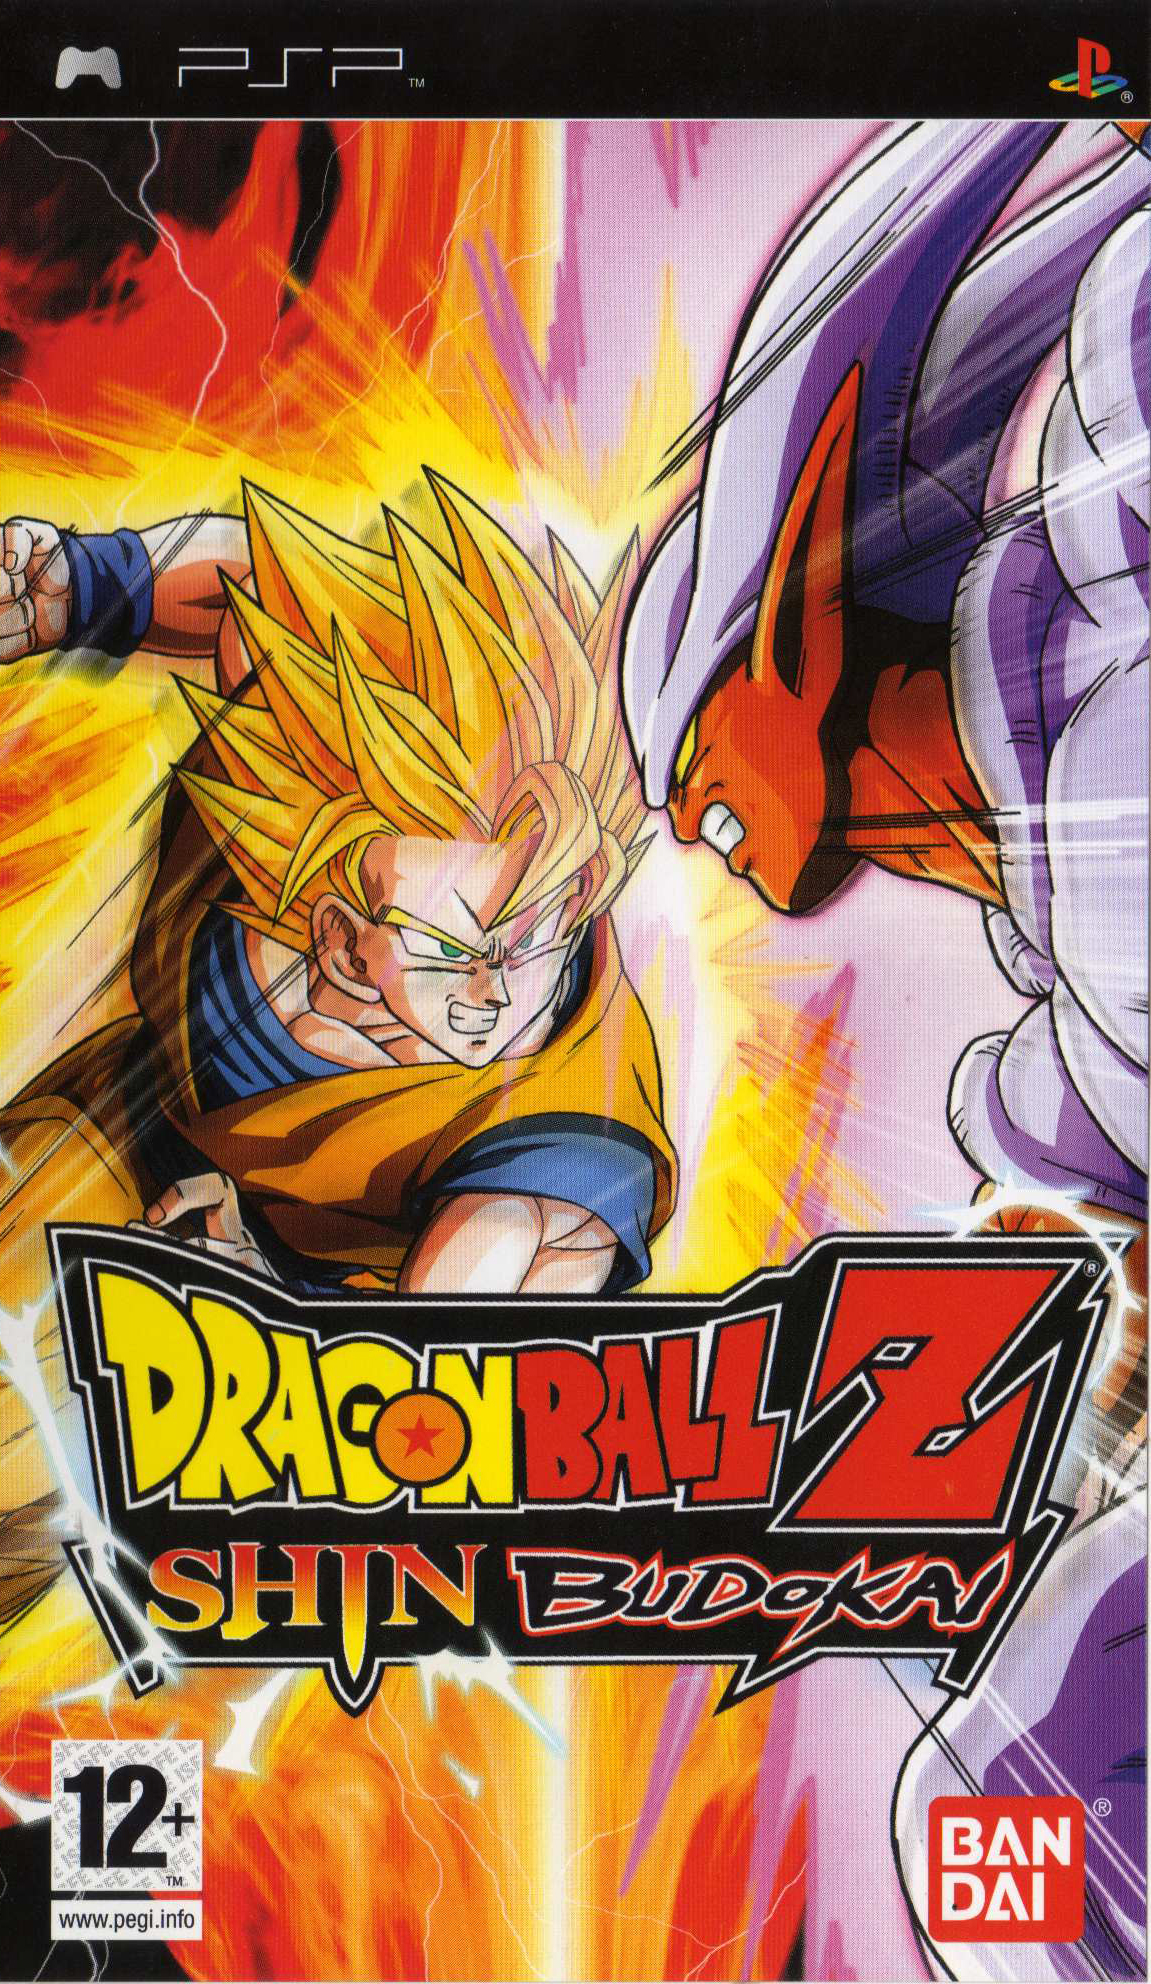 dragon ball z psp games android